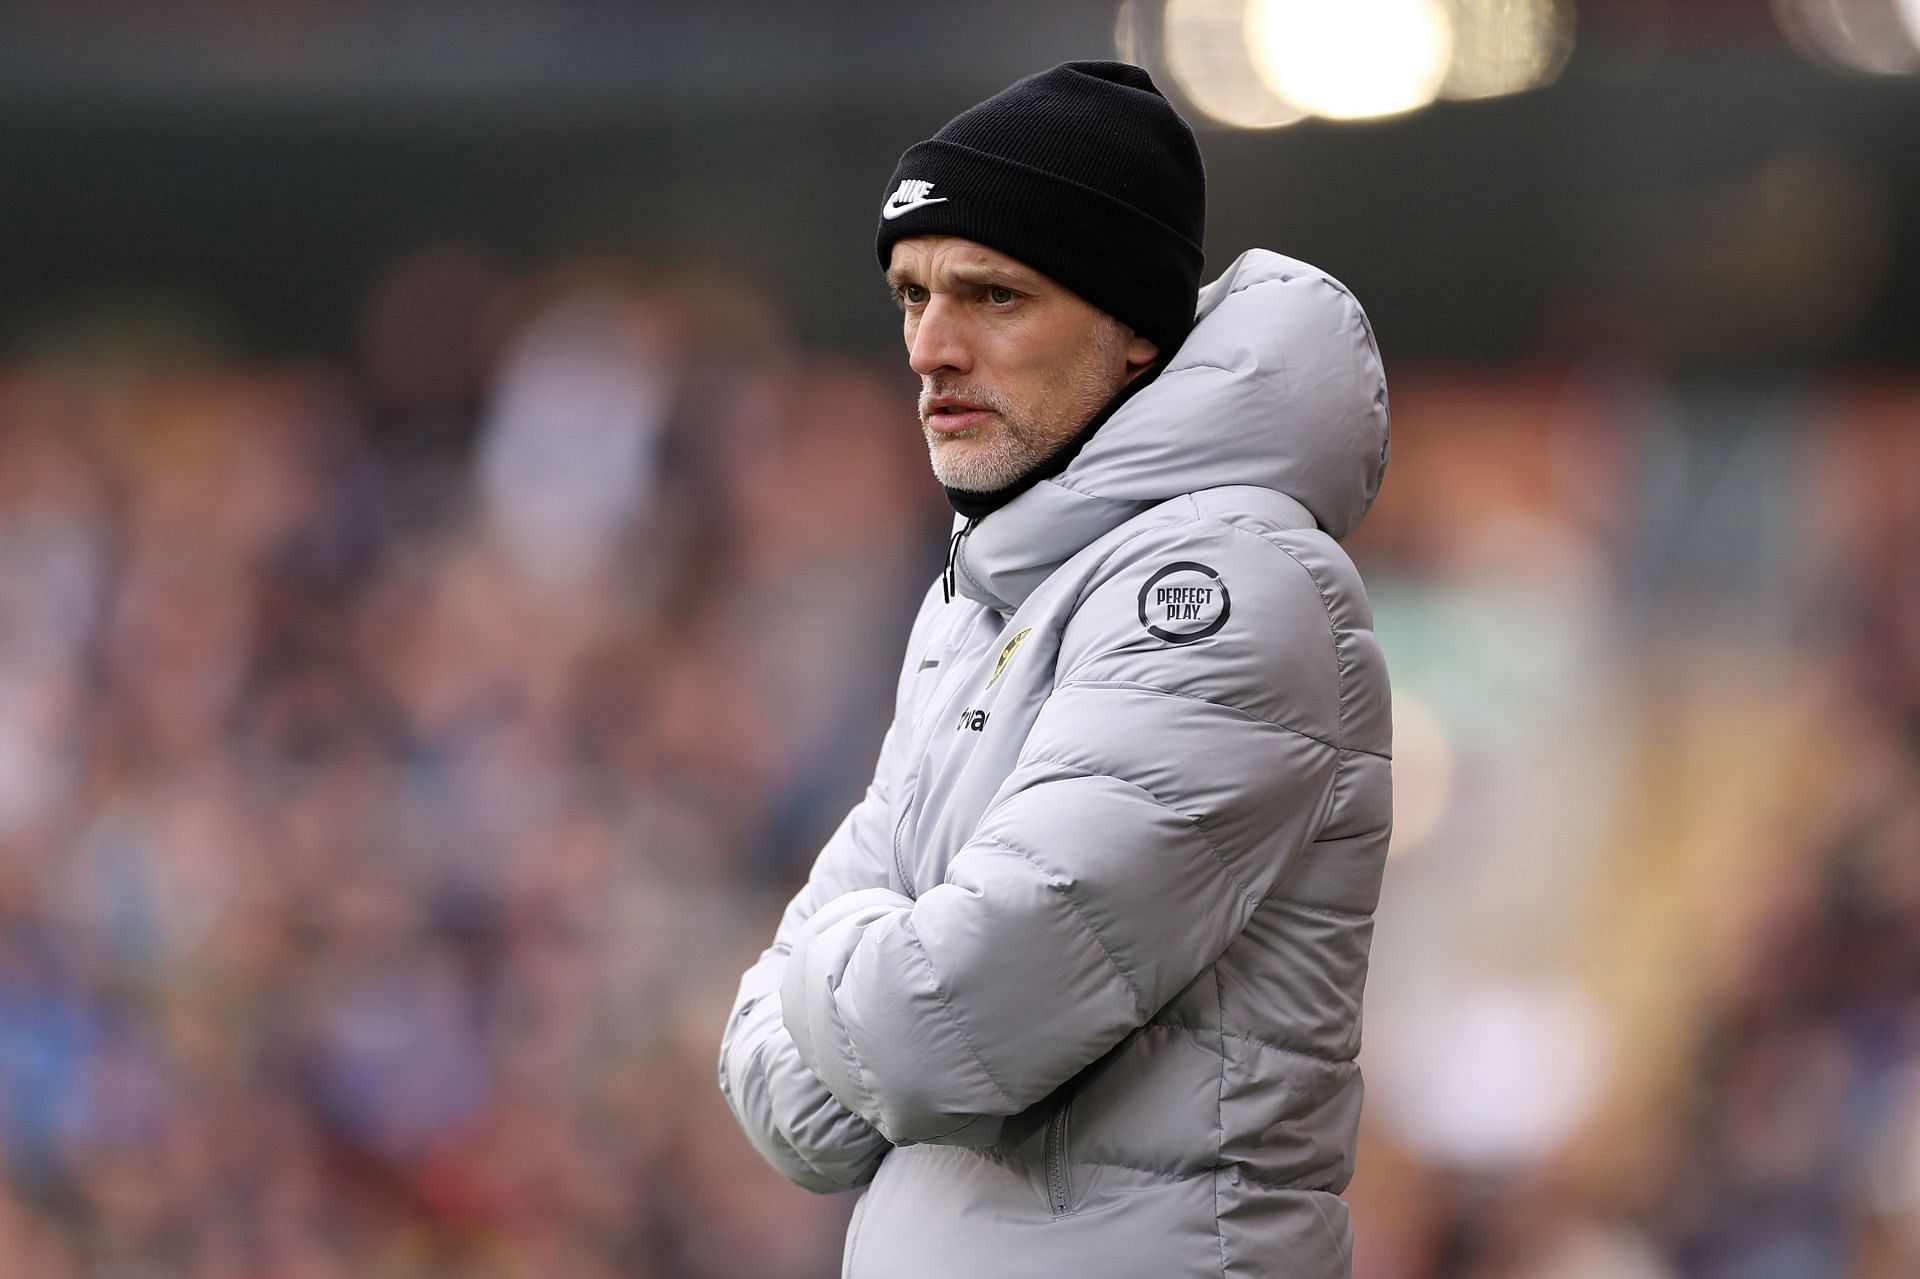 Chelsea manager Thomas Tuchel is preparing to face Crystal Palace in the FA Cup.